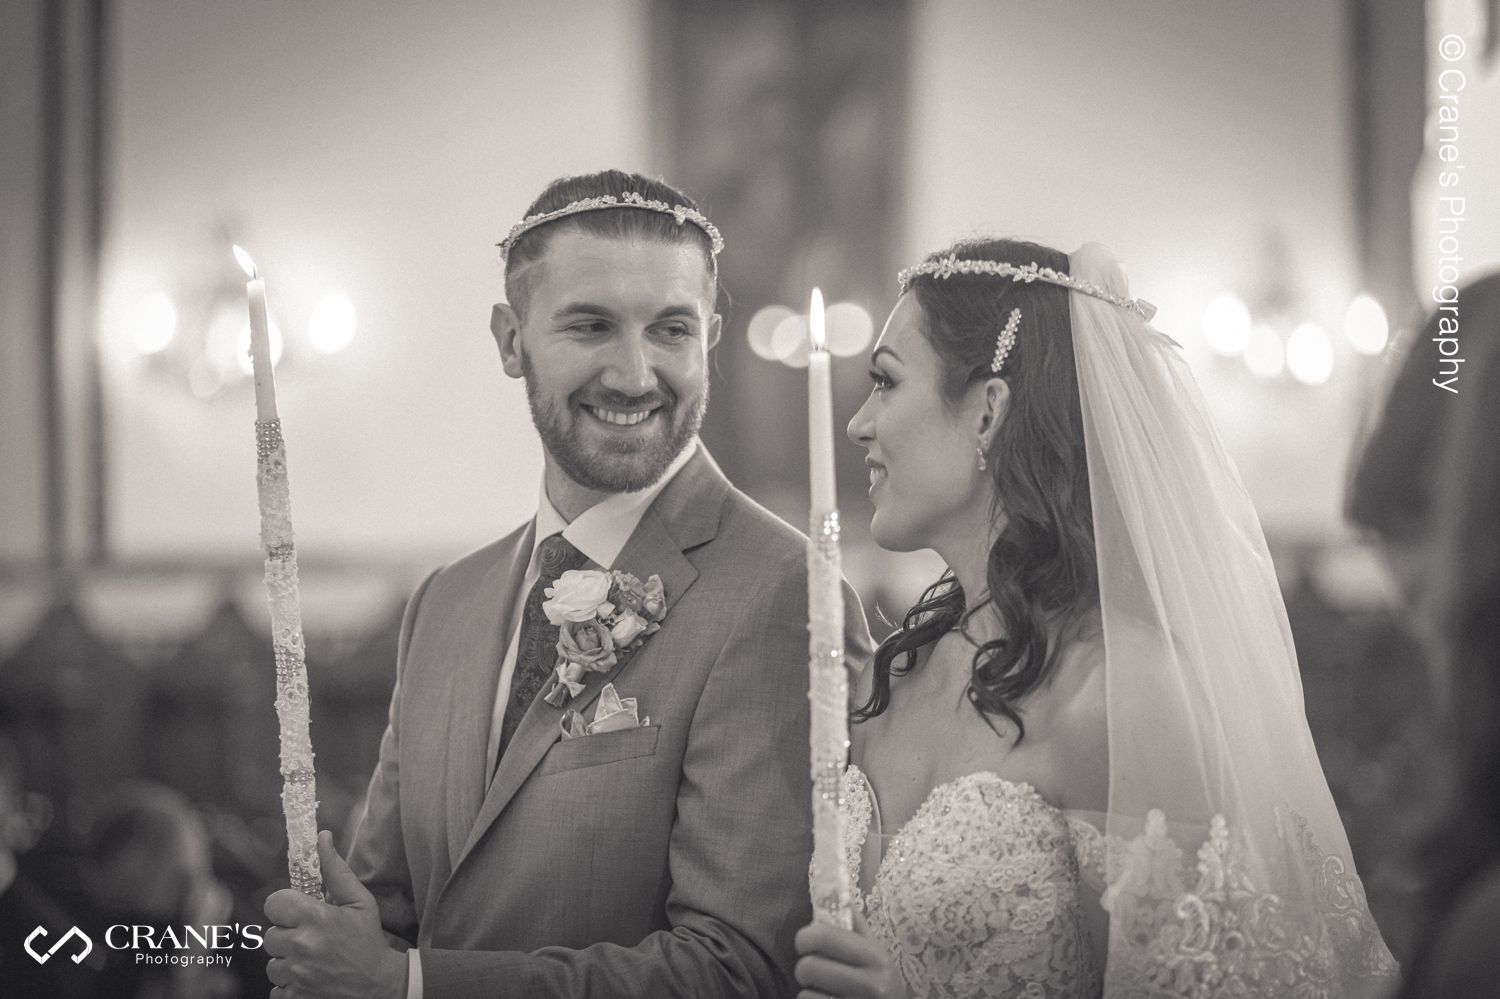 Black and white photo of a bride and groom with their traditional greek orthodox wedding crowns.